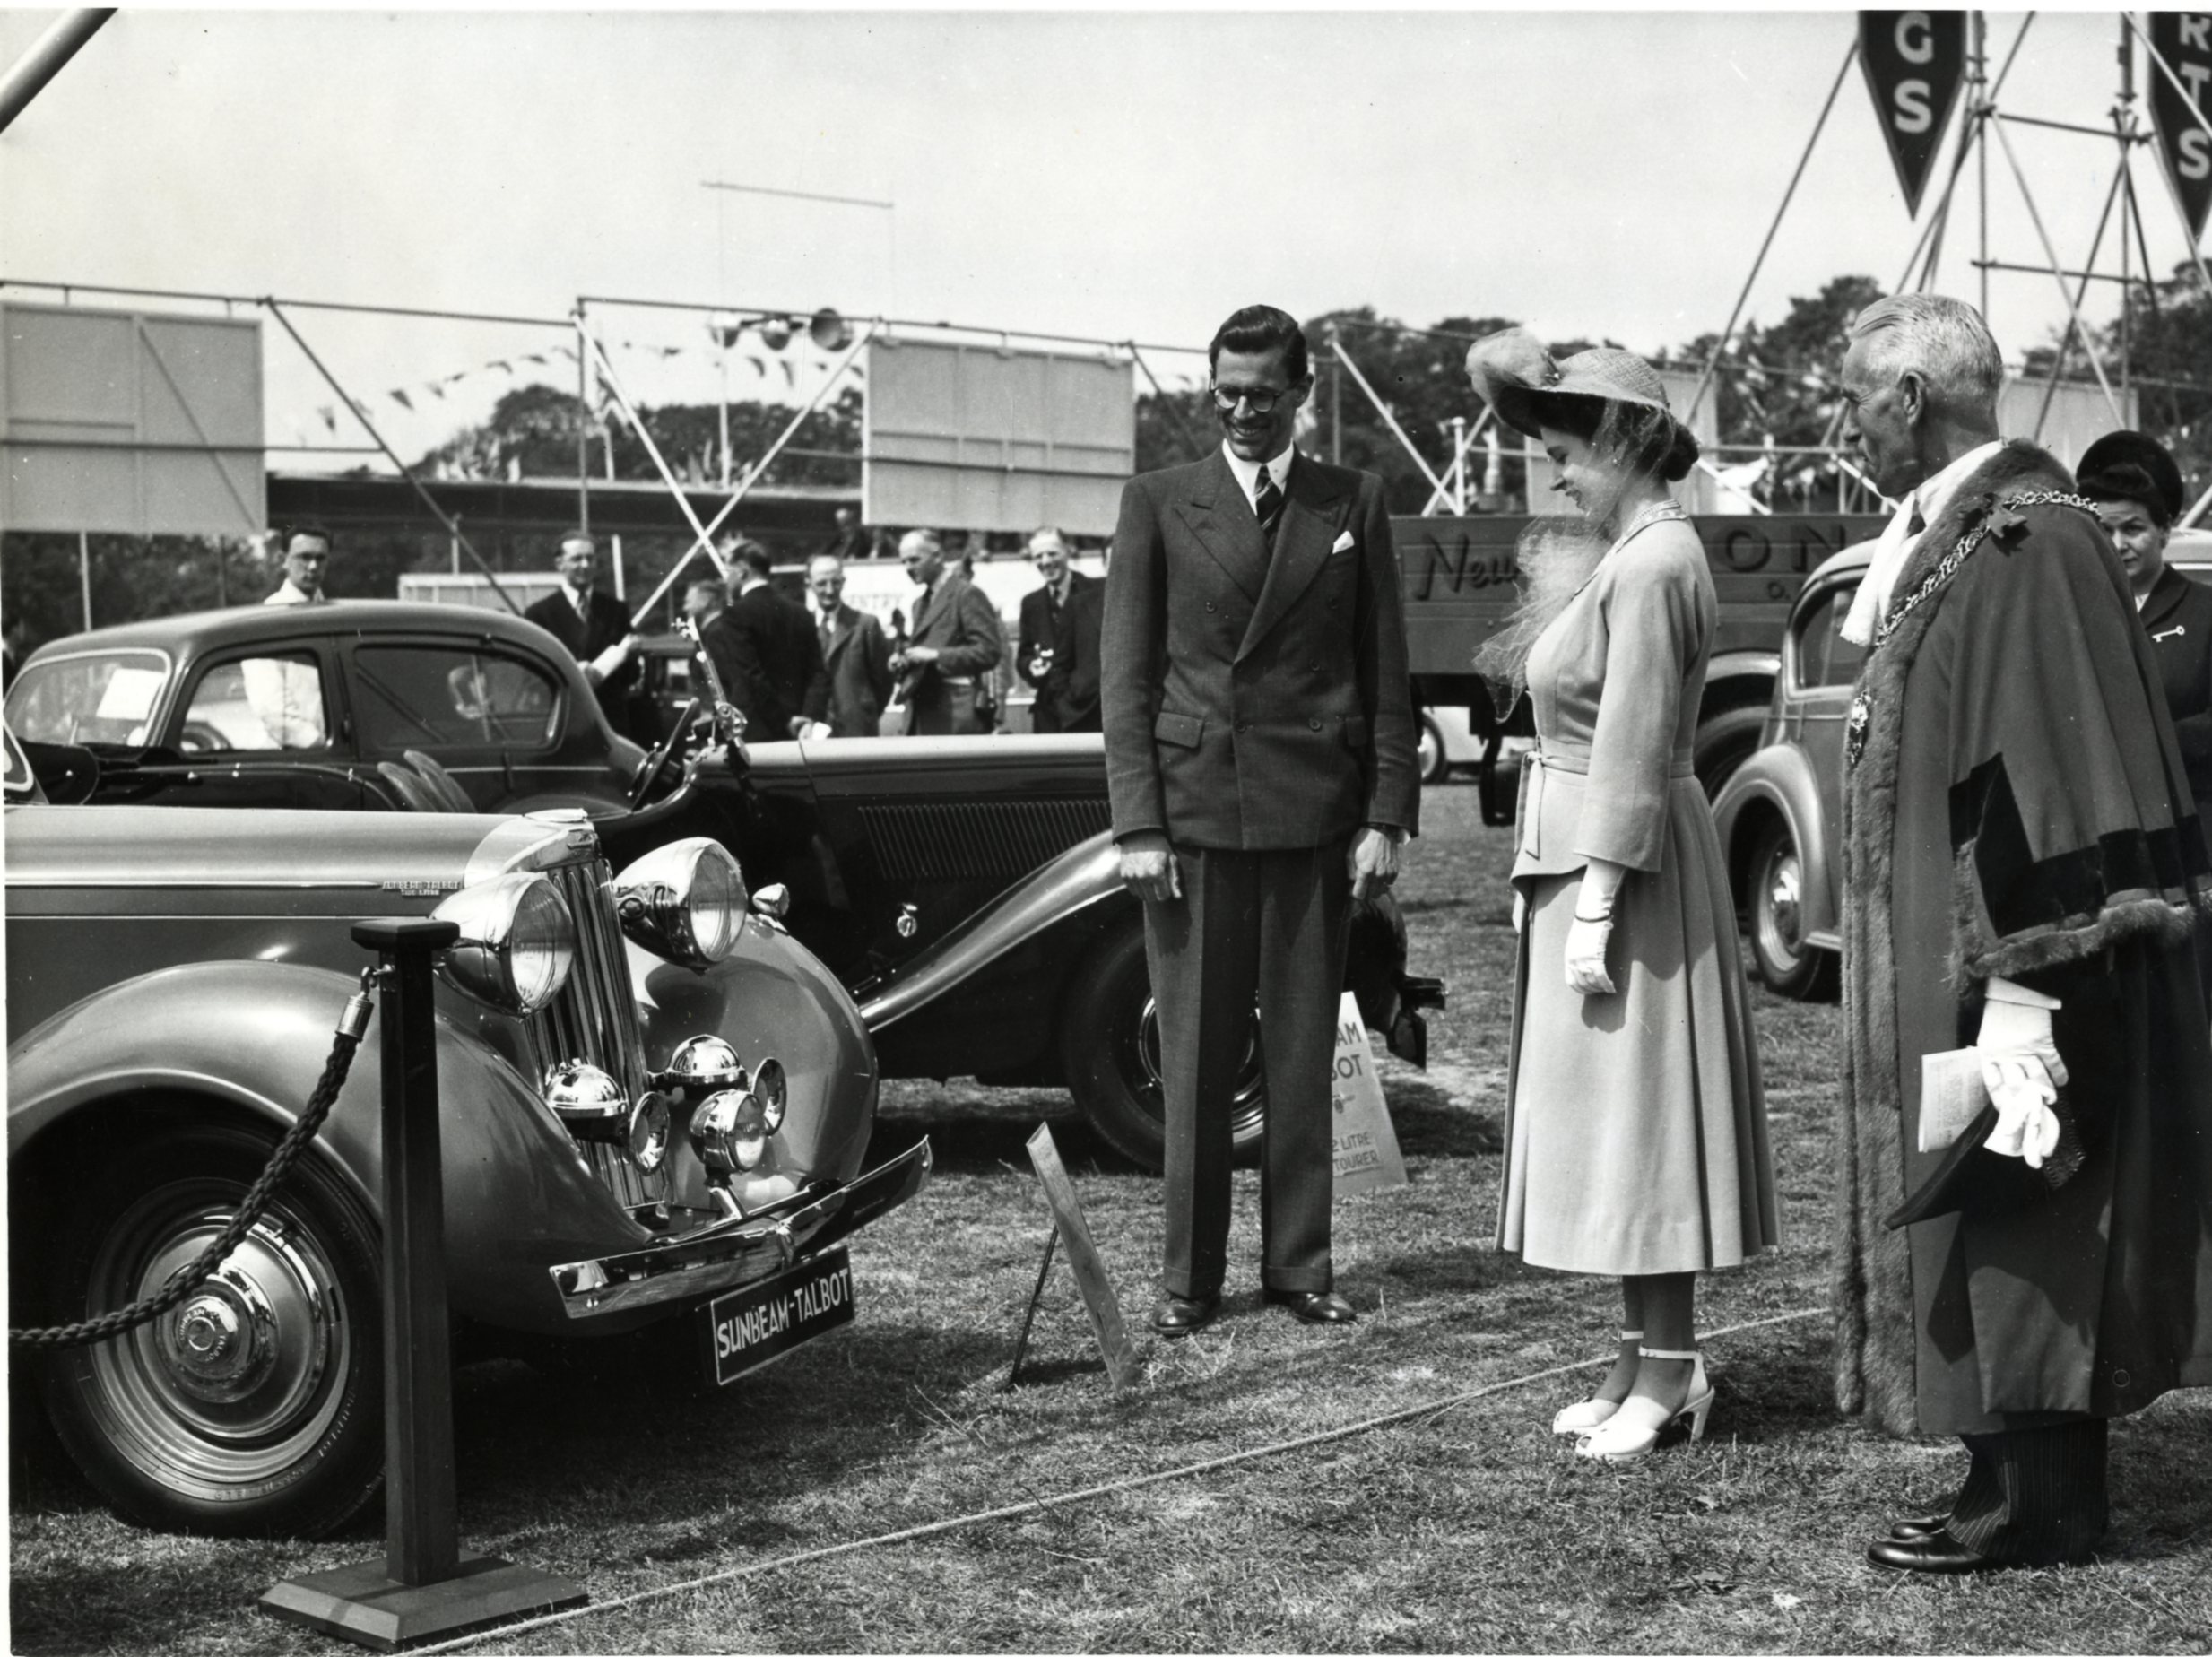 A black and white photo of Princess Elizabeth looking at a display of vehicles in the War Memorial Park, Coventry